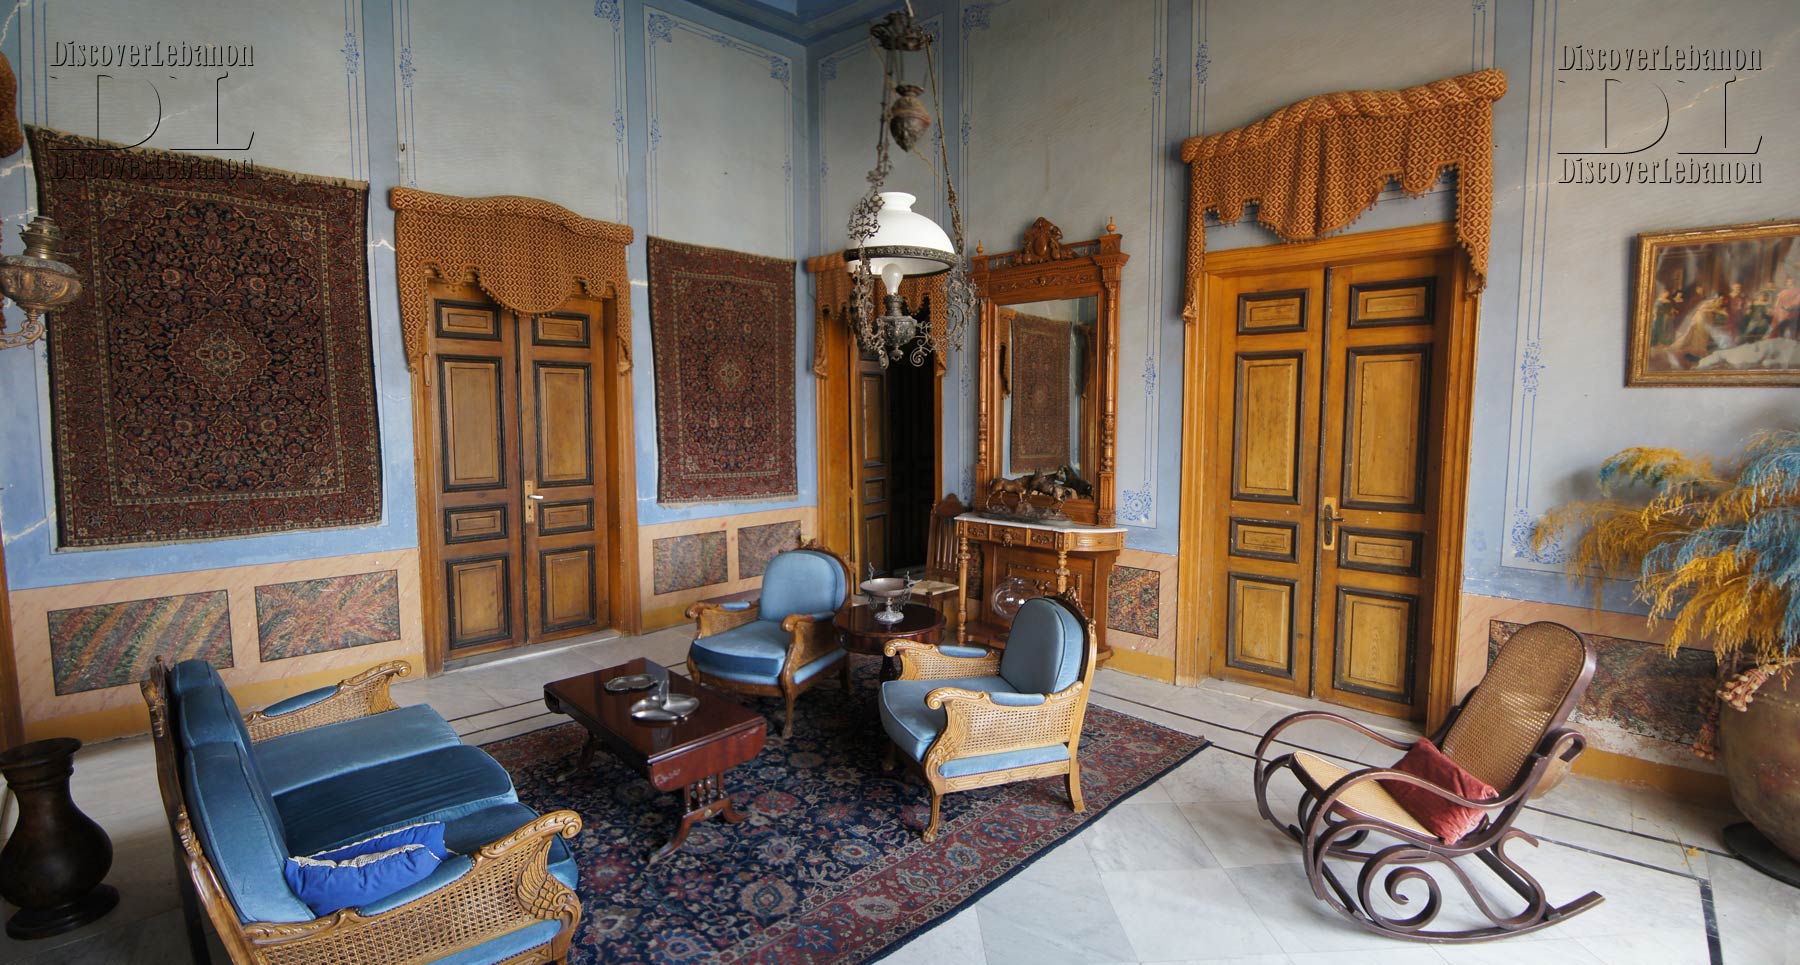 Old house in Douma, interior of home